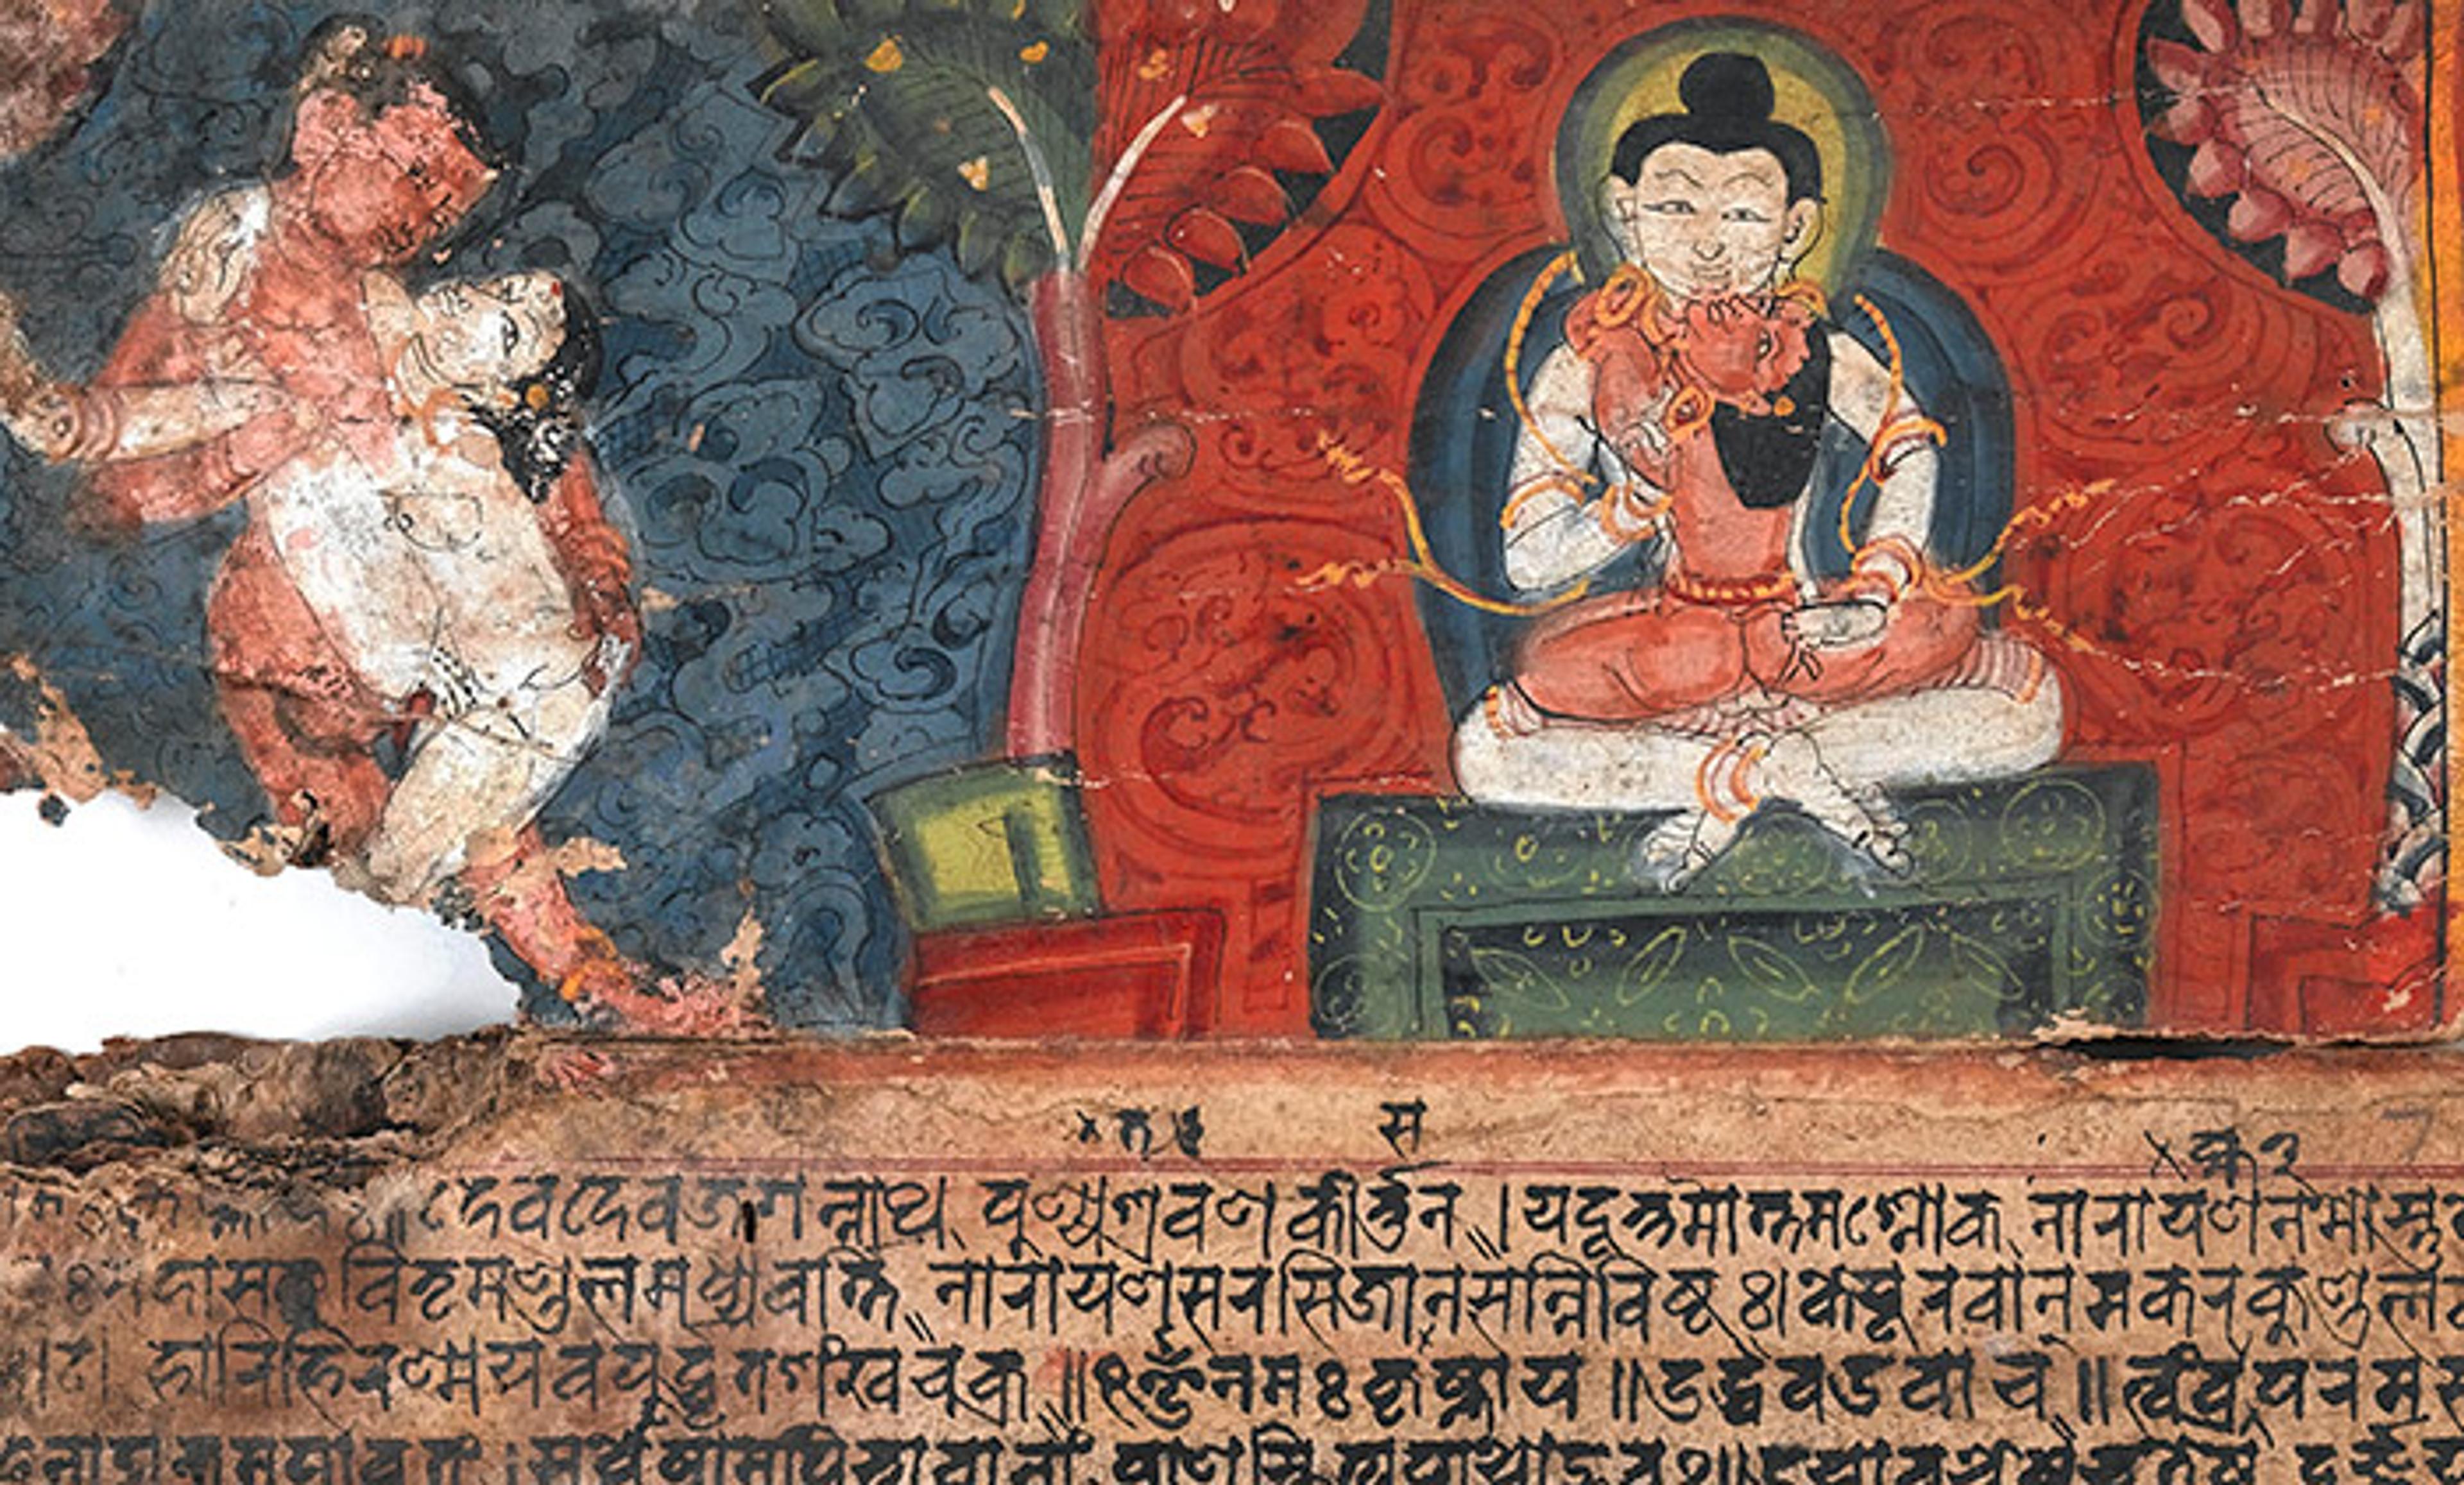 <p>Detail from a Nepalese Kama Sutra manuscript.<em> Photo courtesy the Wellcome Collection</em></p>